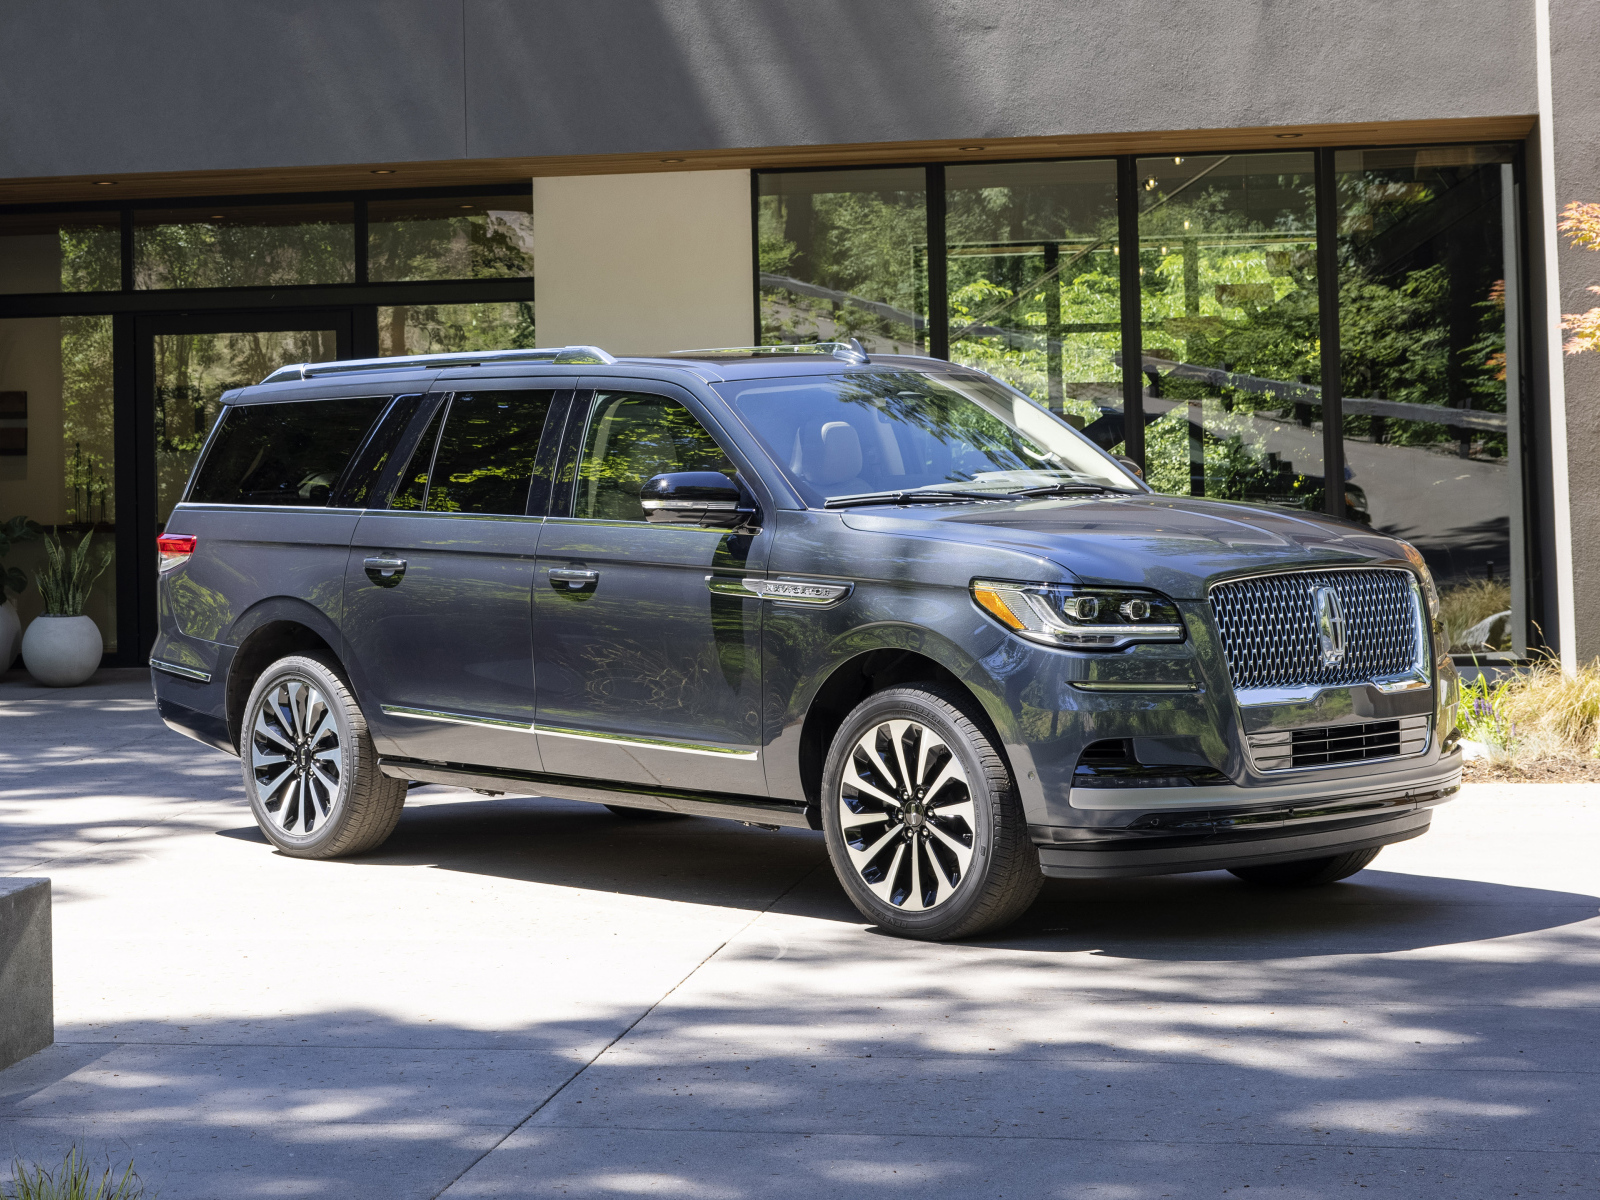 Large car Lincoln Navigator L, 2022 in front of the building